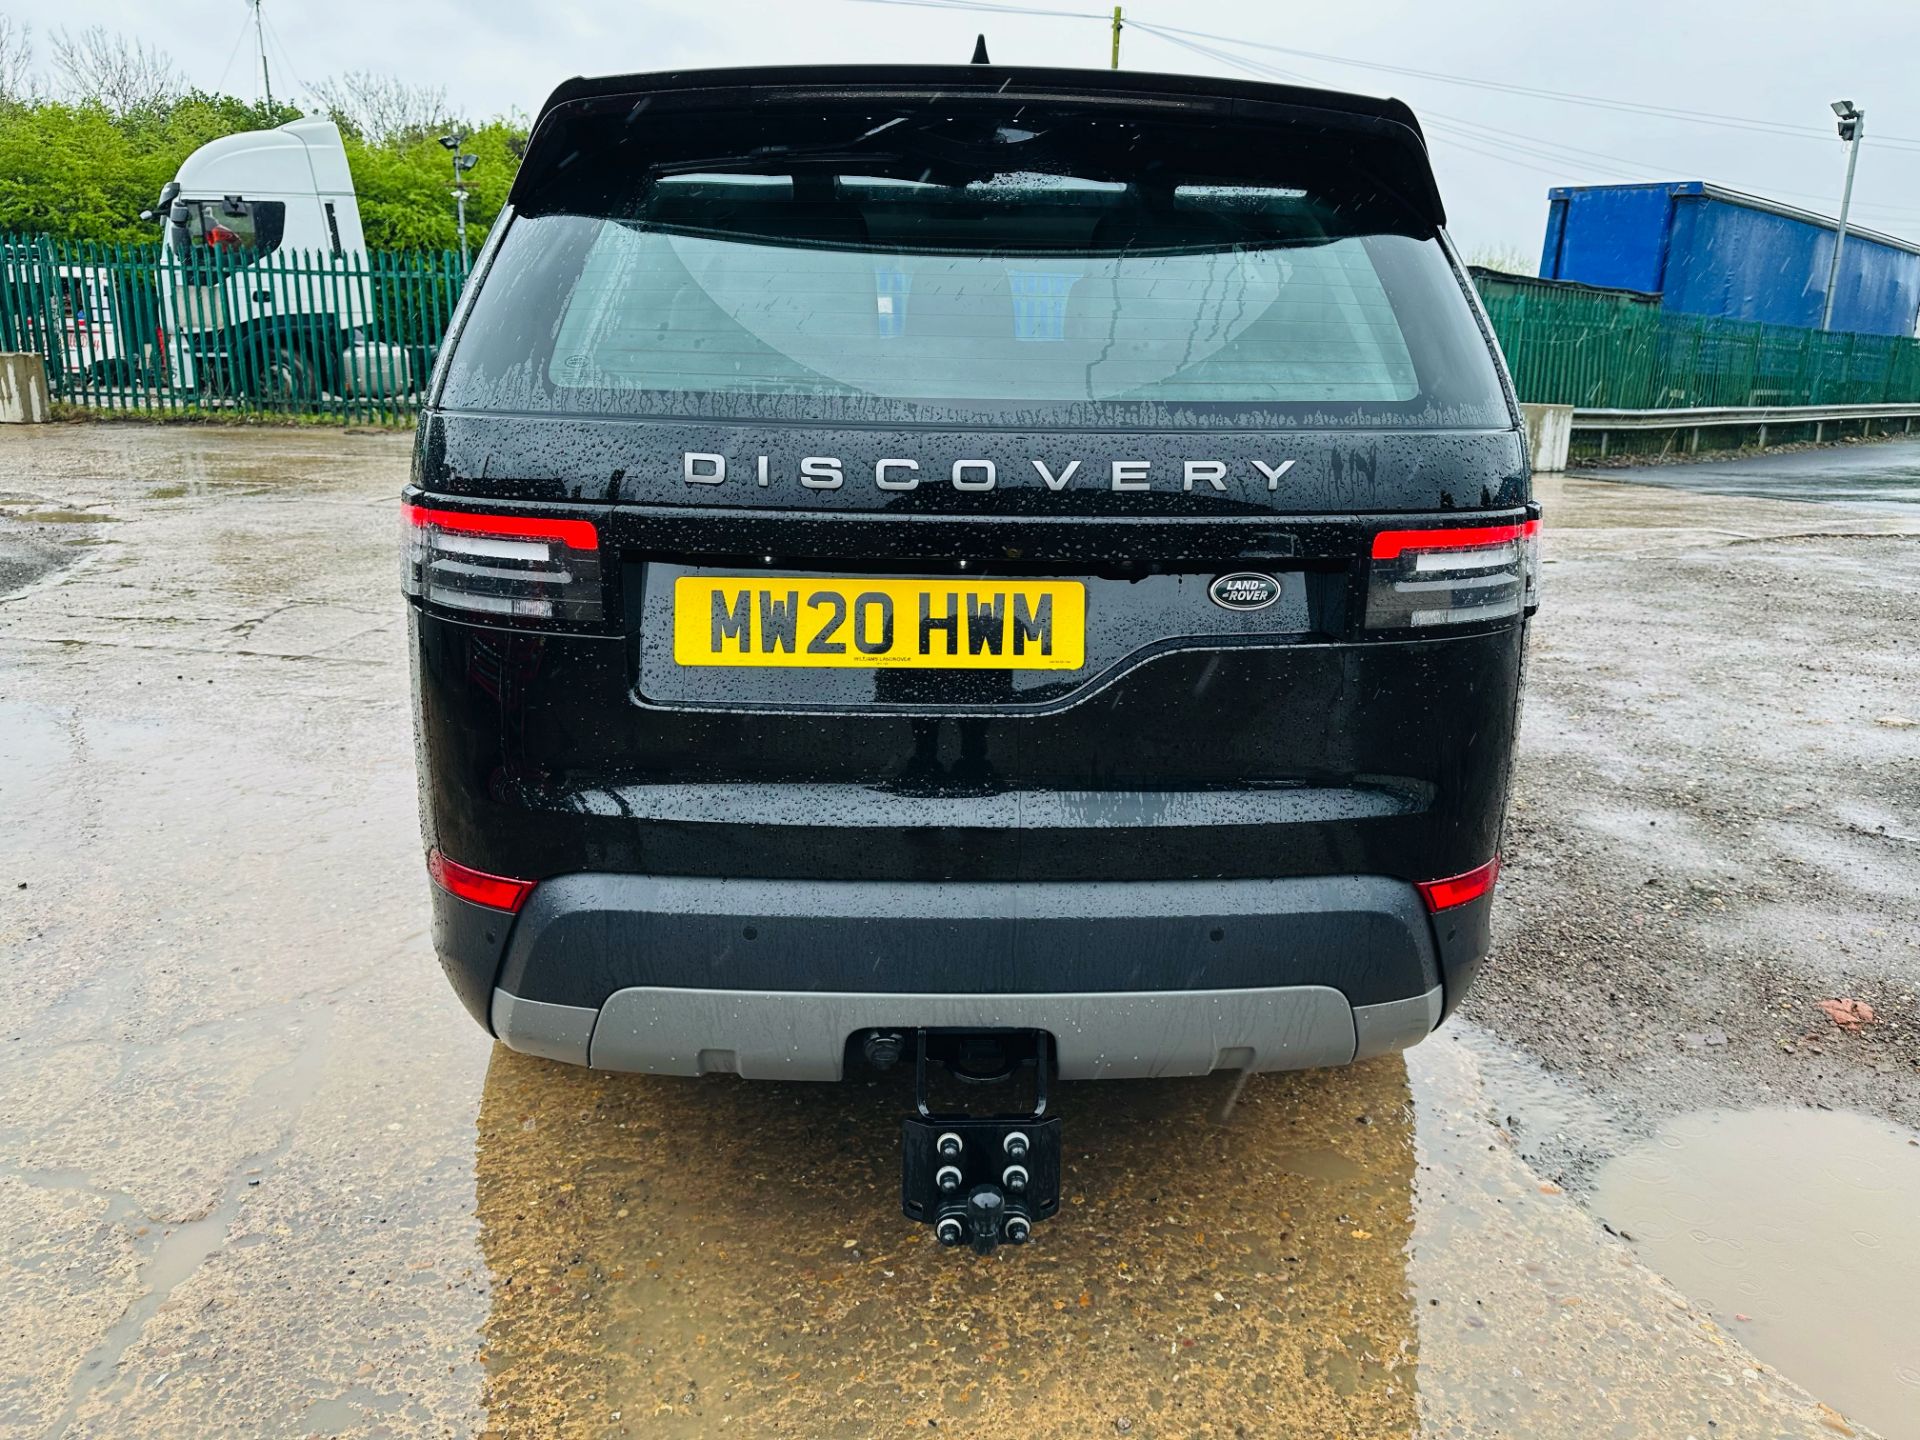 (Reserve Met) Land Rover Discovery SE Automatic (Black Edition) - 2020 Model - Only 57k Miles! - Image 8 of 40